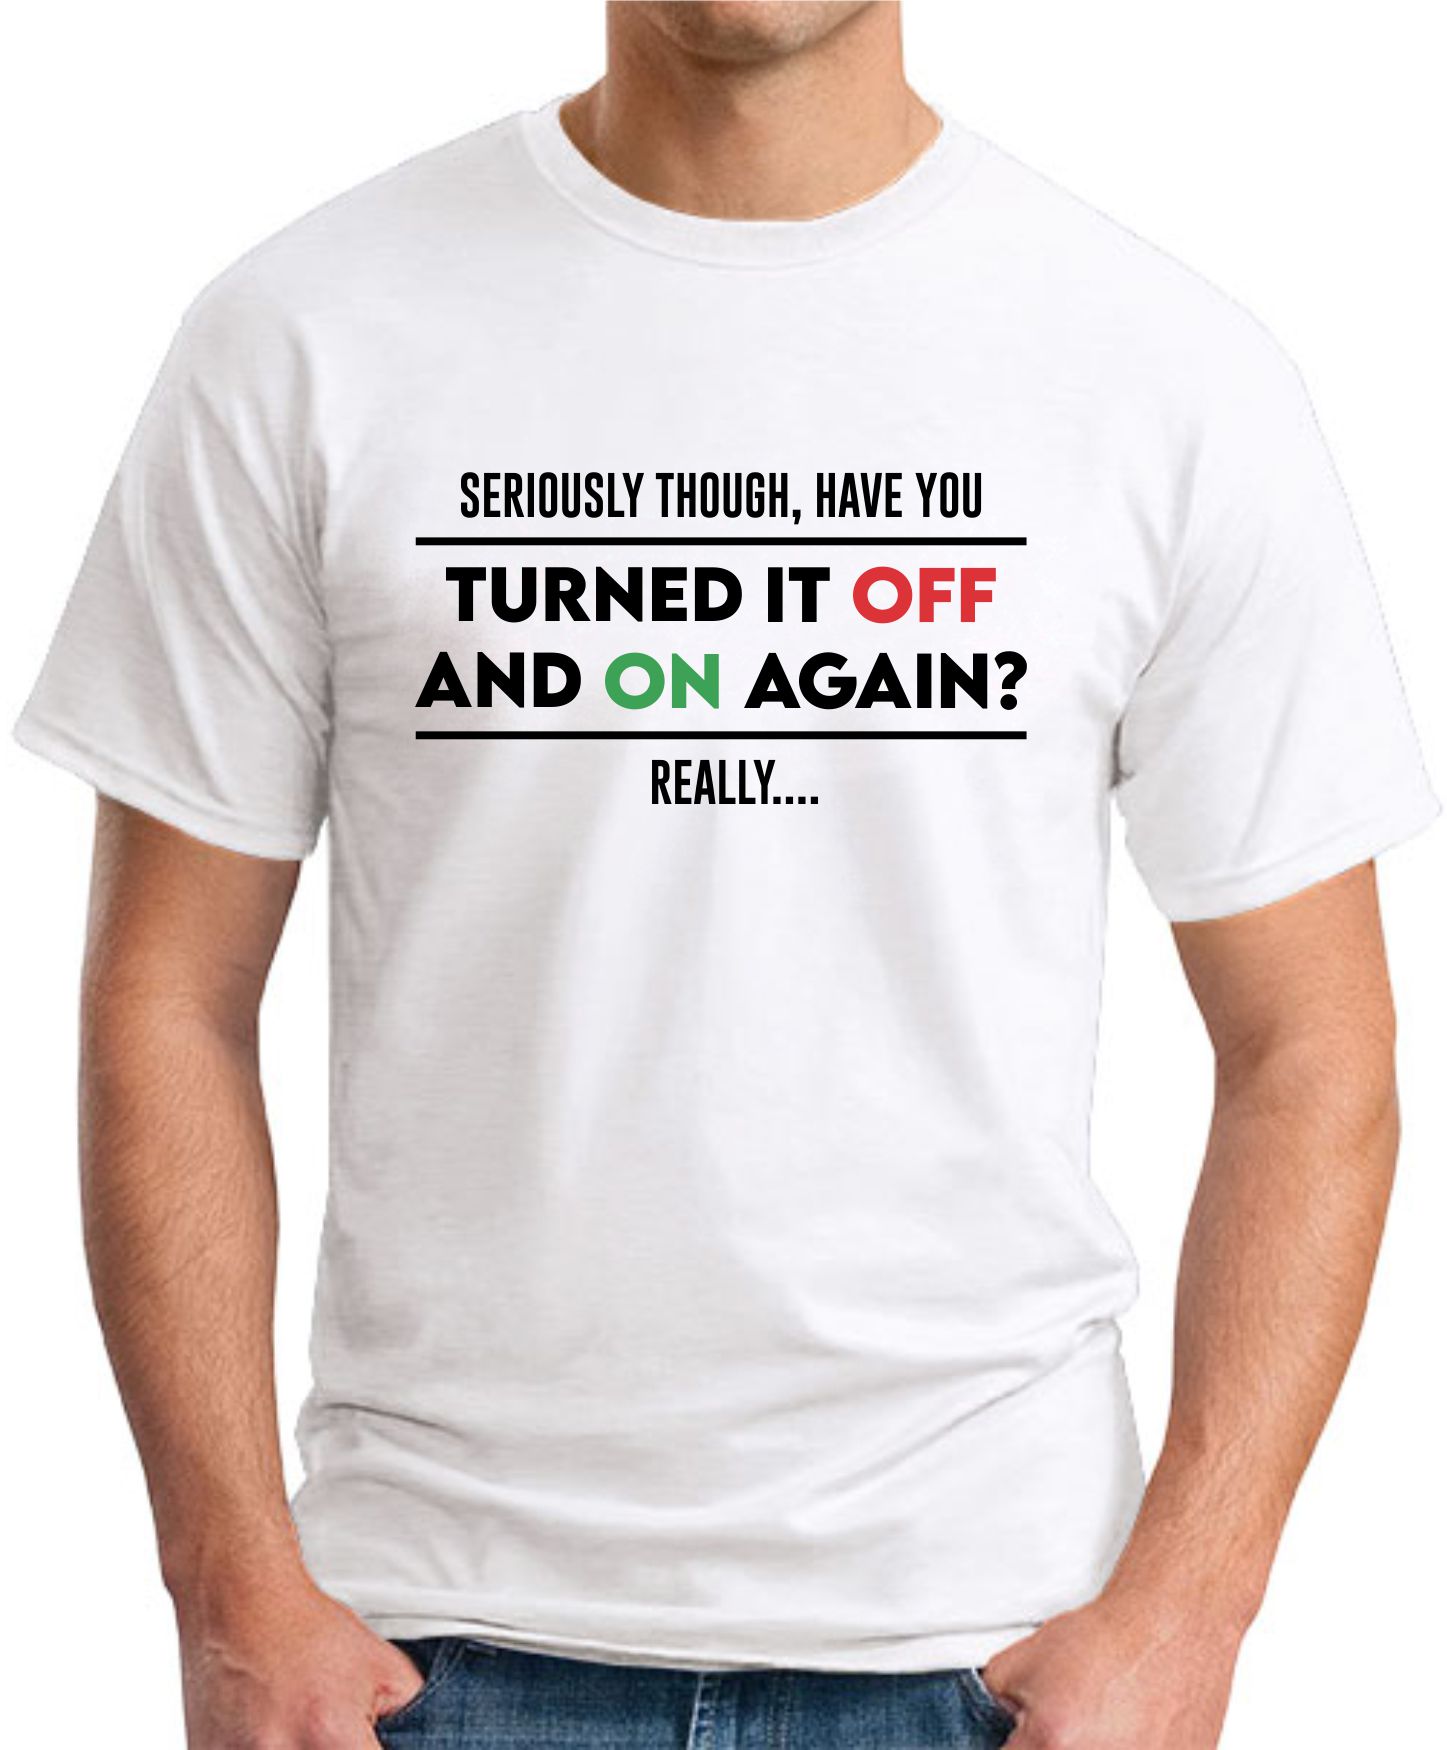 HAVE YOU TURNED IT OFF AND ON AGAIN, REALLY? T-SHIRT - GeekyTees